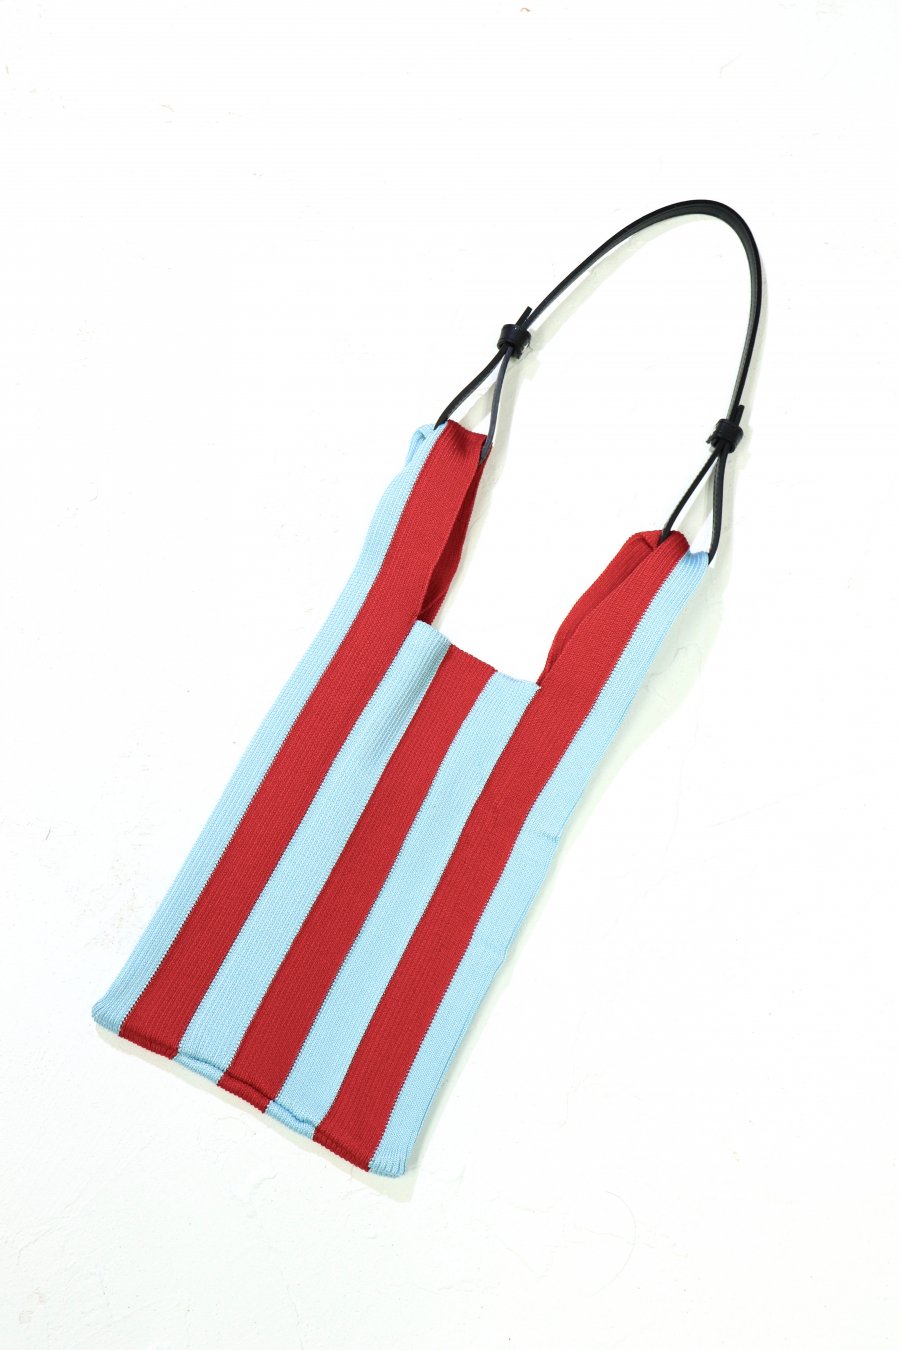 LASTFRAME（ラストフレーム）のSTRIPE MARKET BAG SMALL-RED x